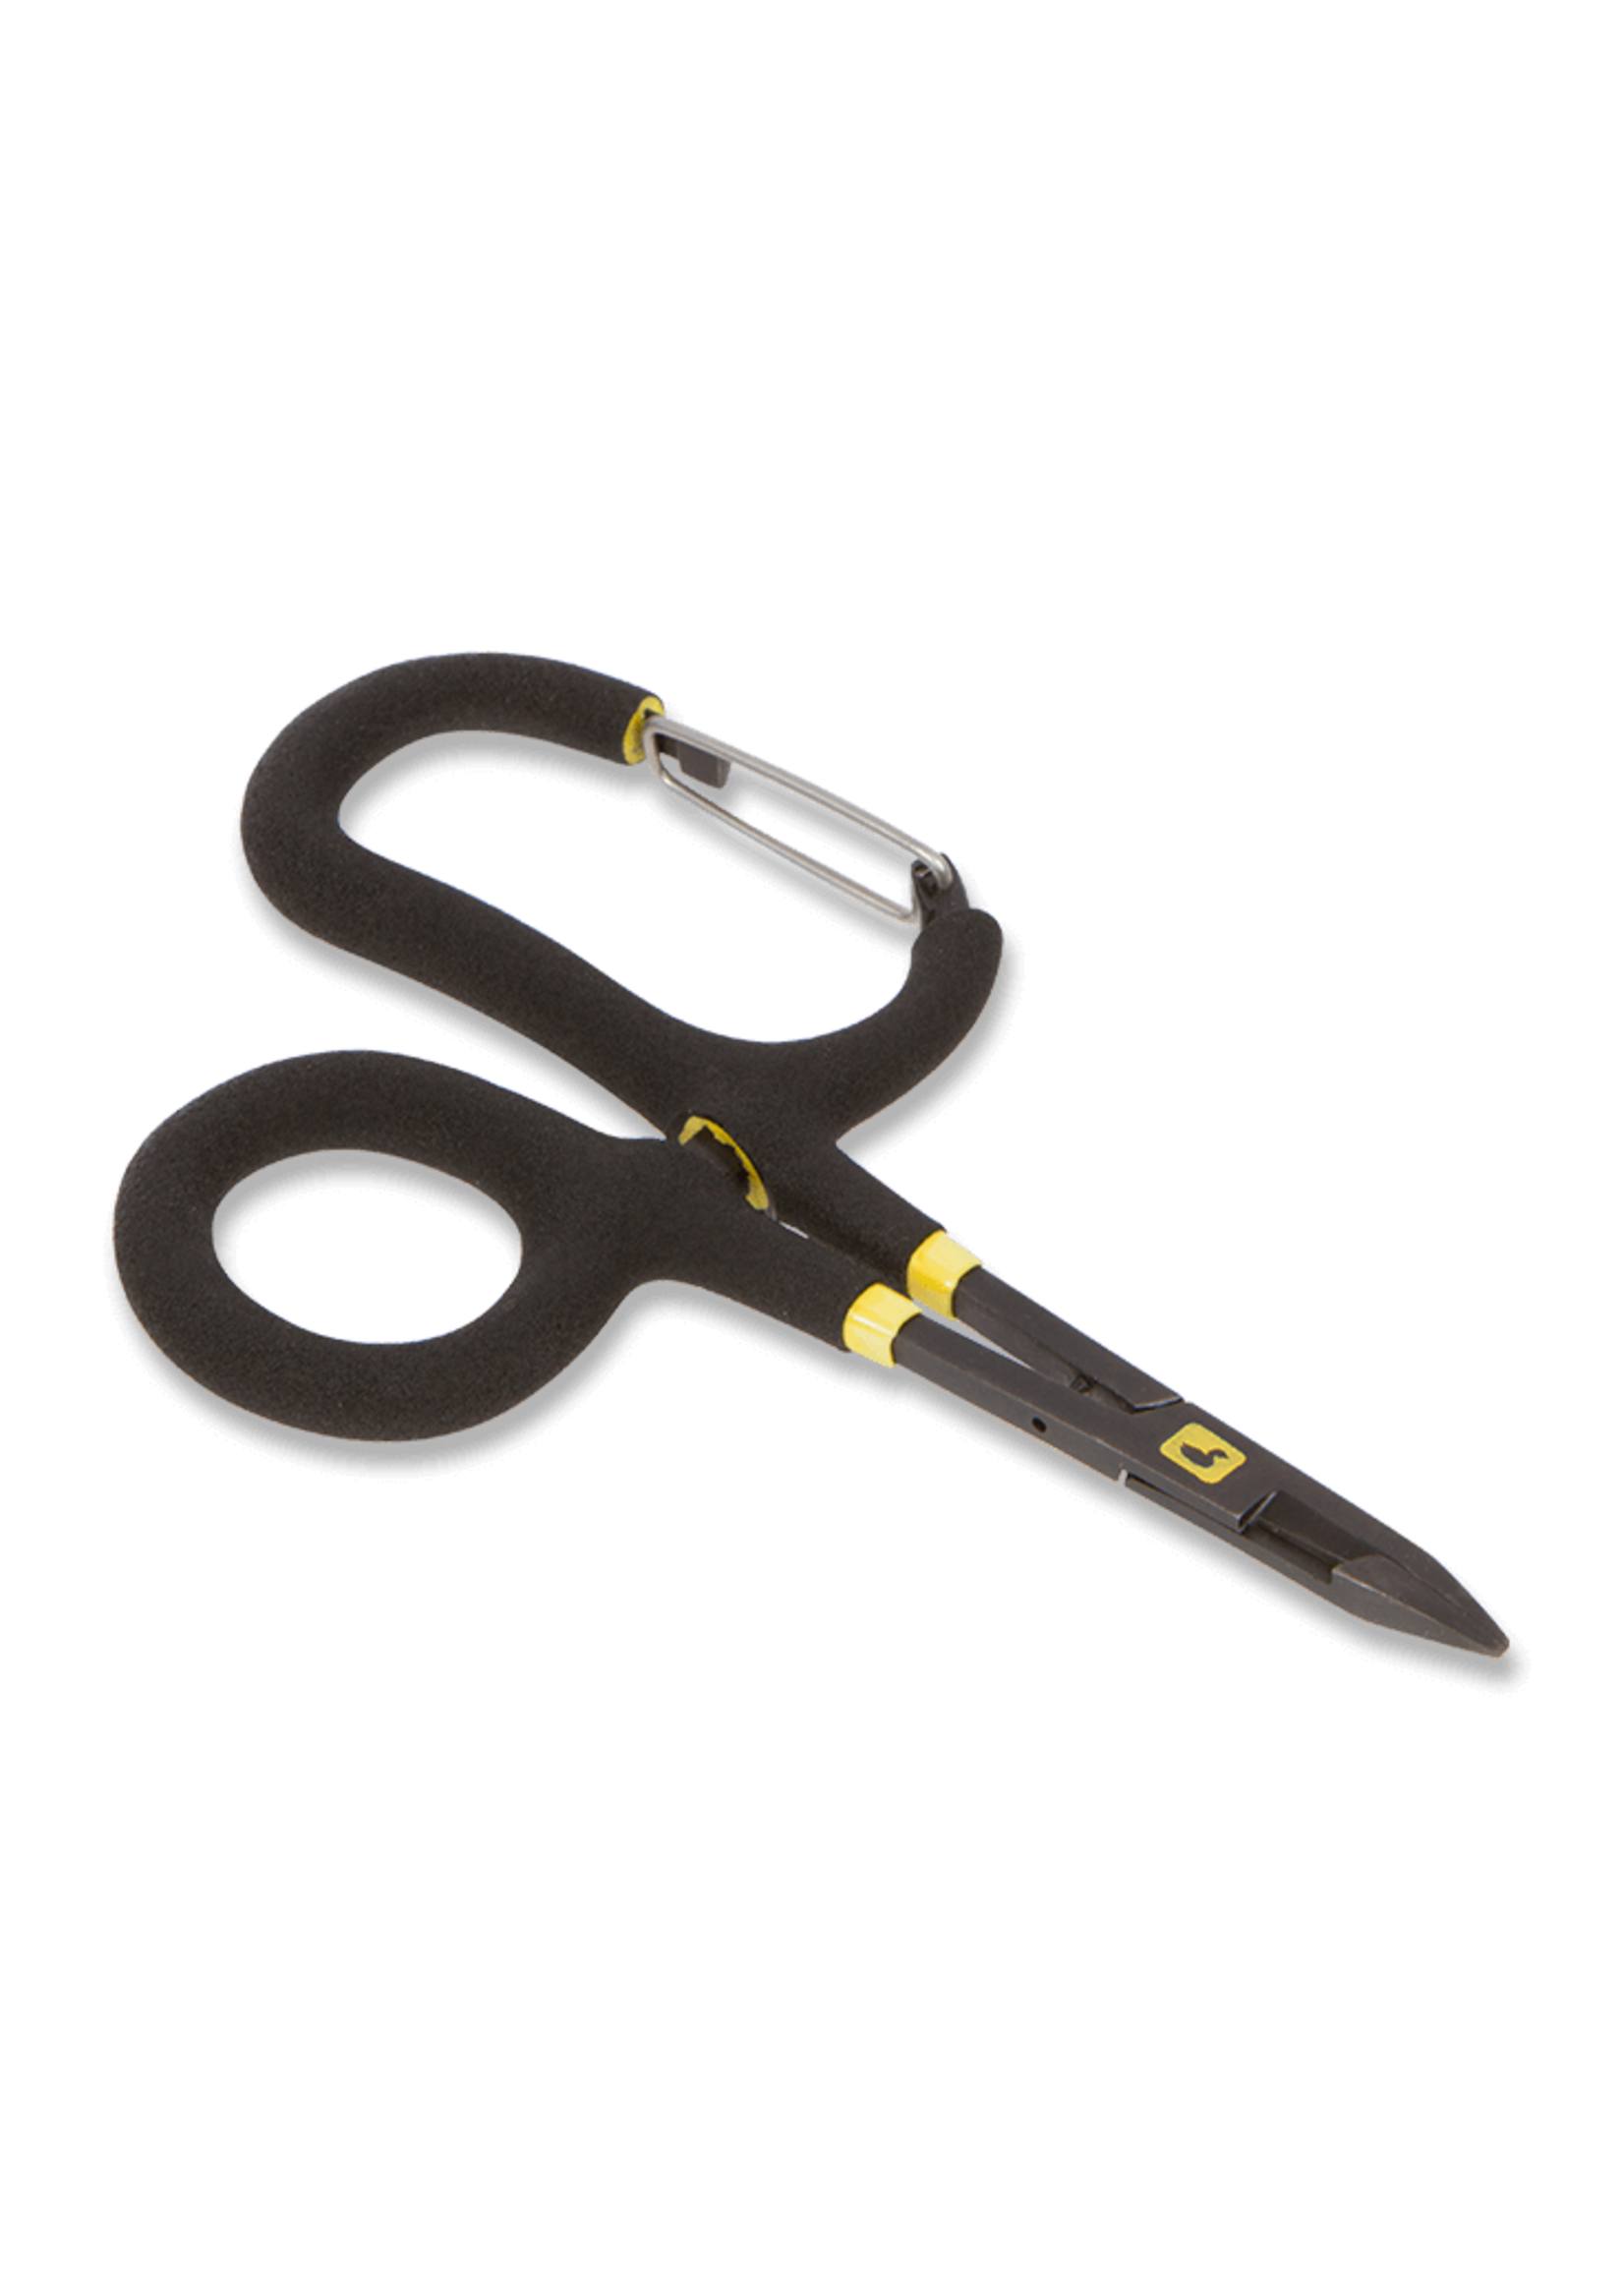 Loon Outdoors Loon Rogue Quickdraw Forceps